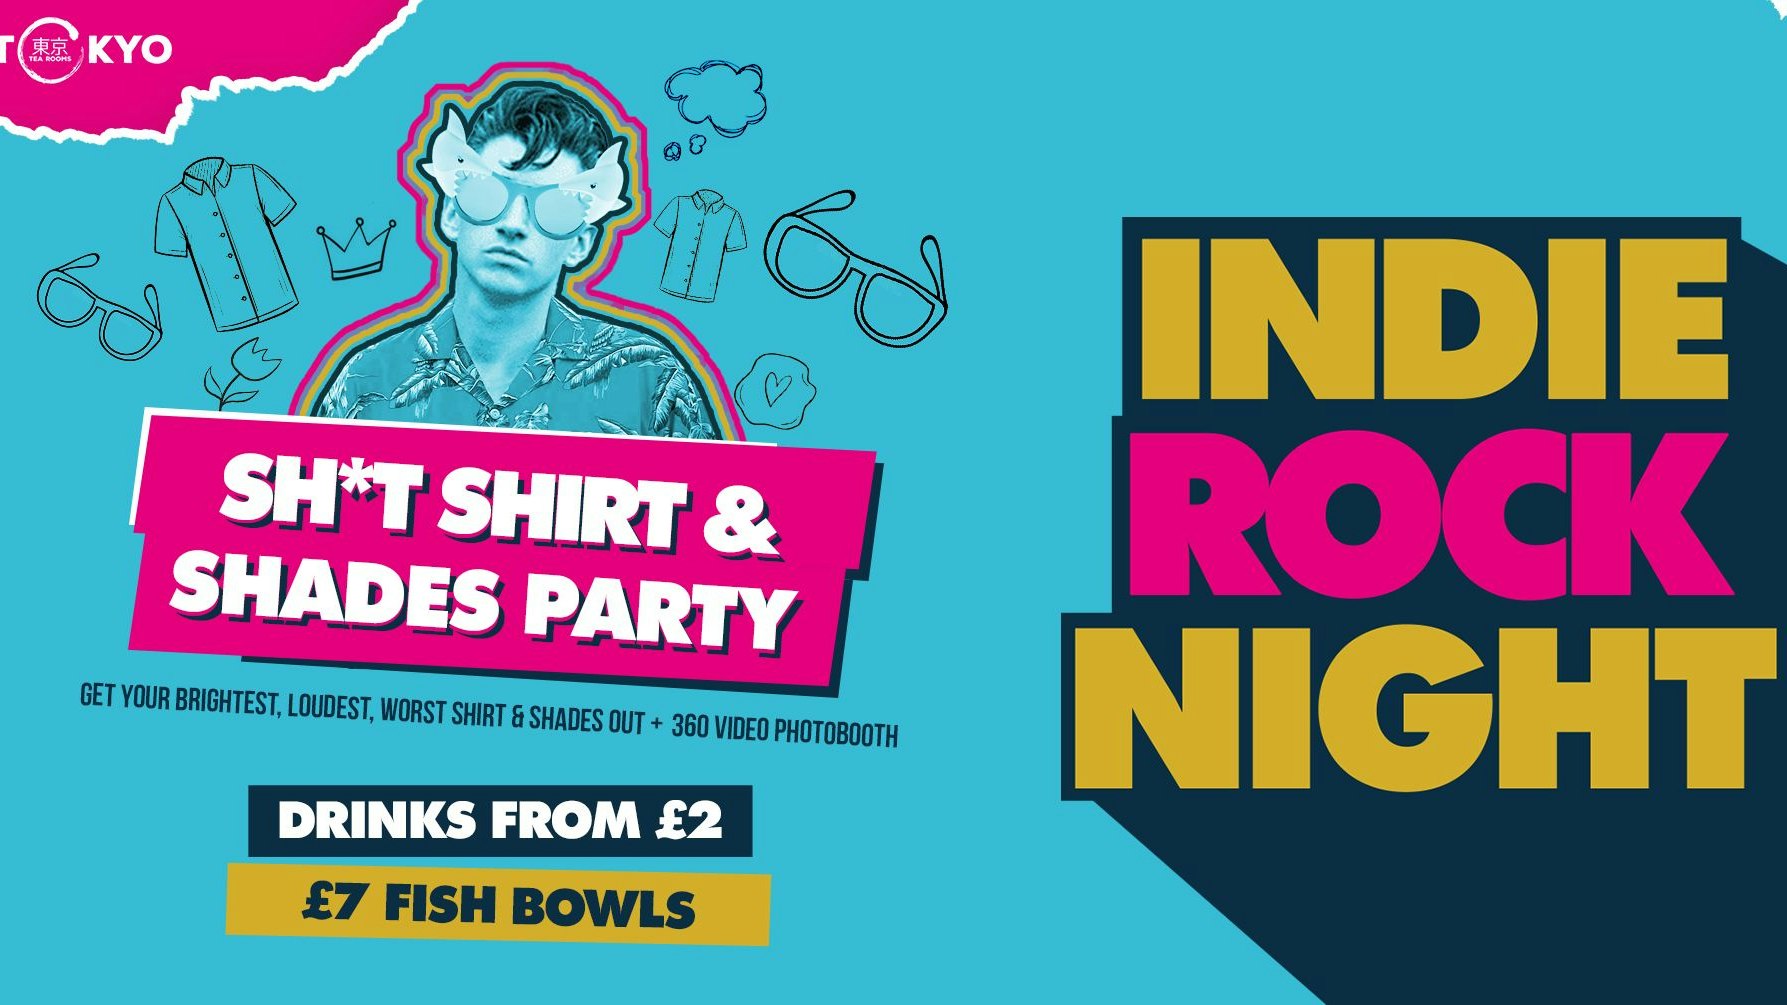 Indie Rock Night ∙ SH*T SHIRT & SHADES *ONLY 9 £3 TICKETS LEFT*